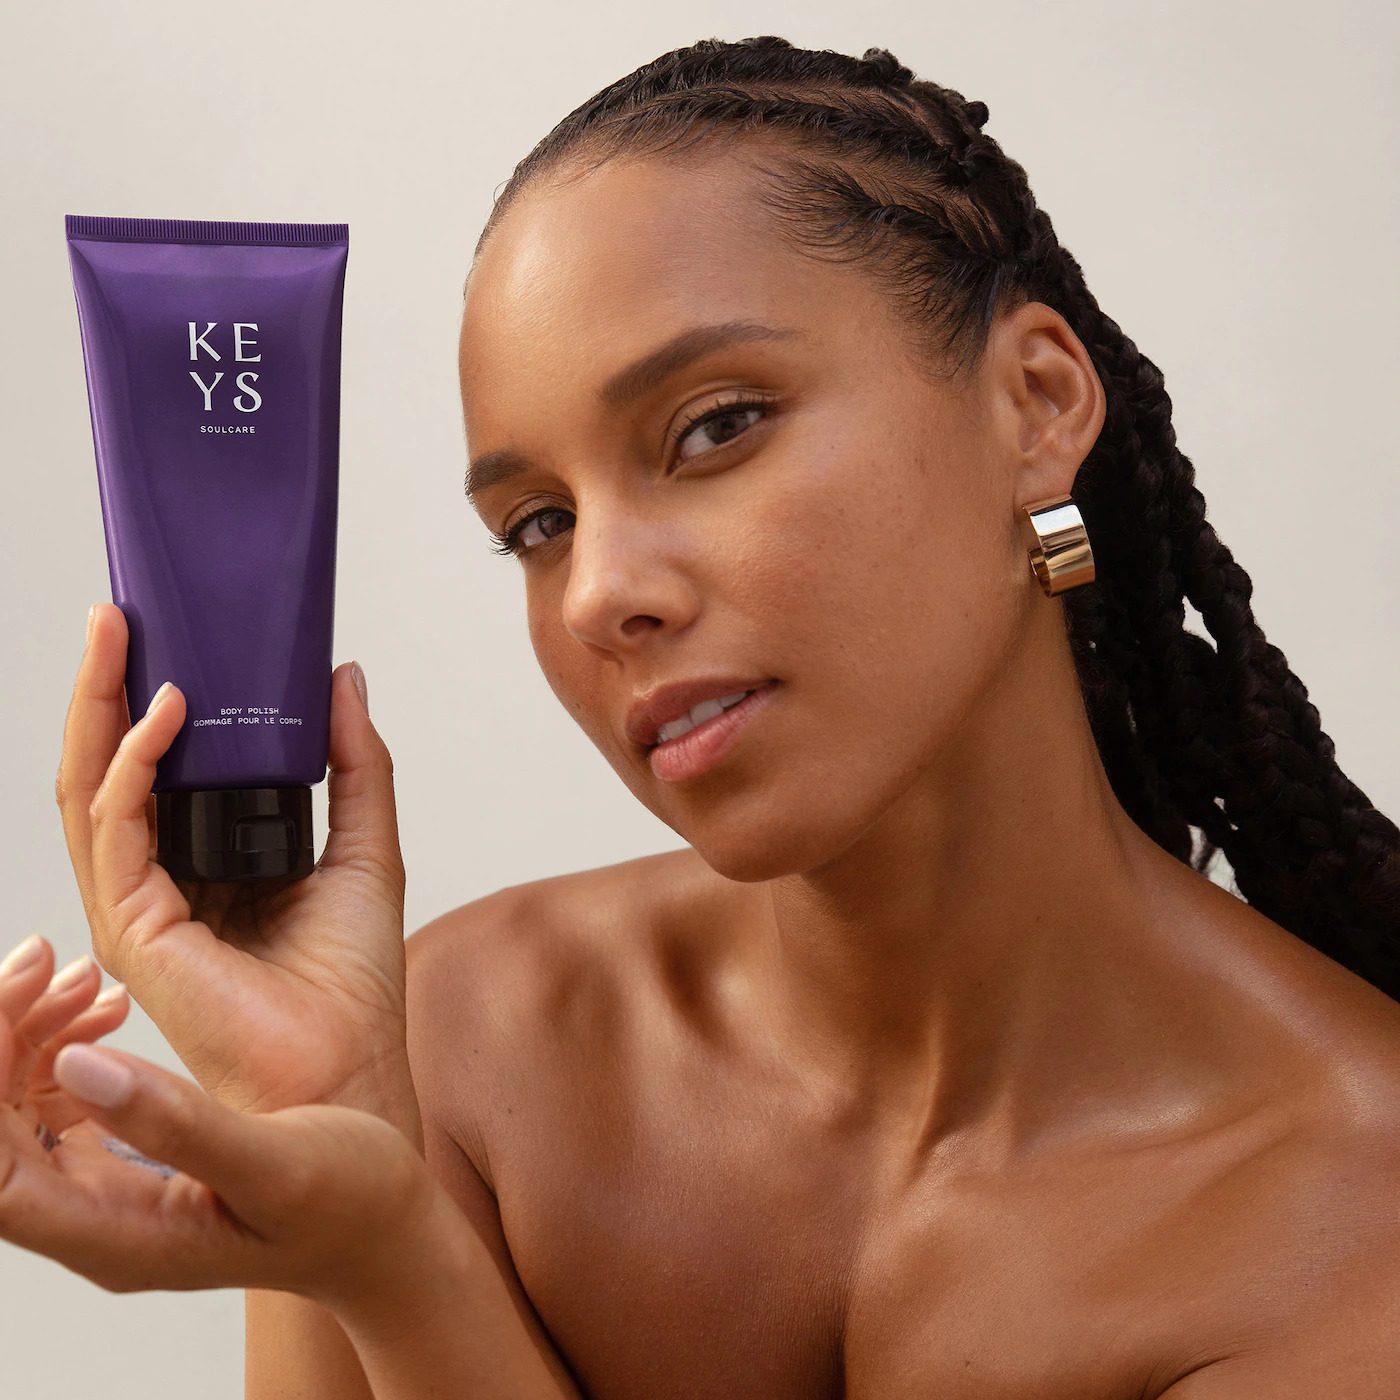 Alicia Keys Launches Lifestyle Beauty Brand, Keys Soulcare -